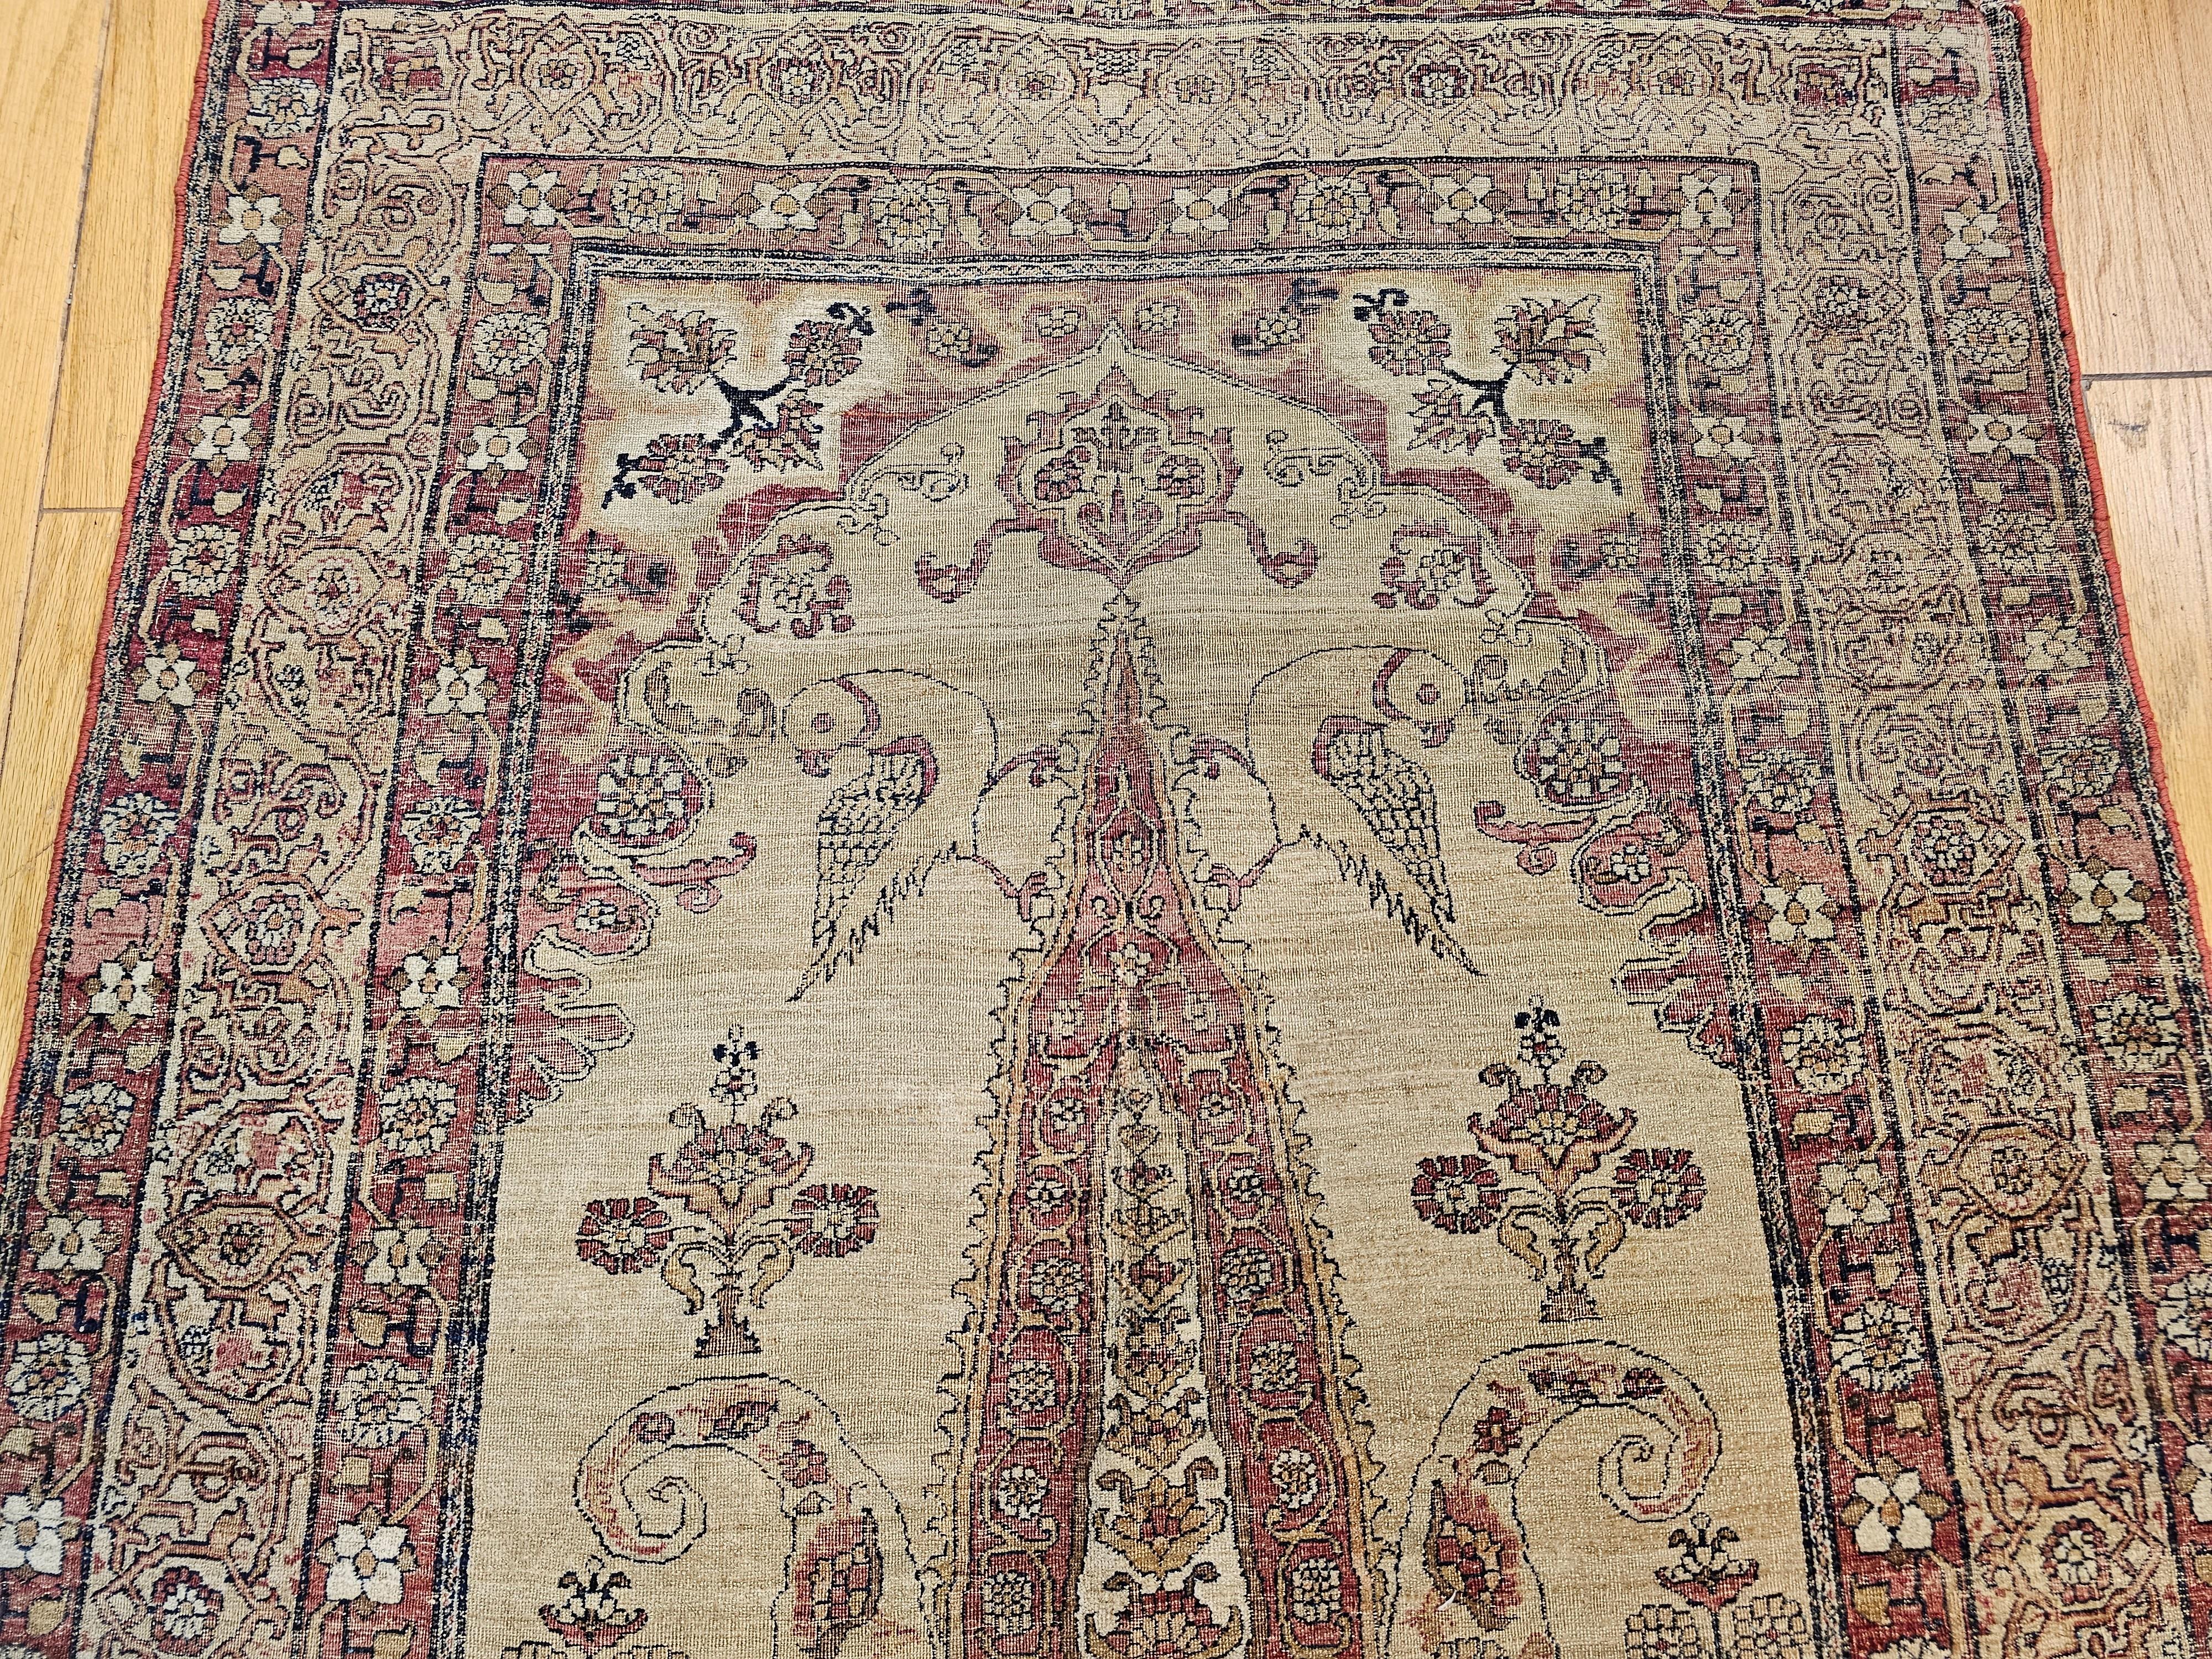 19th Century Persian Kerman Lavar Pictorial “Tree of Life” Rug in Camel, Red For Sale 4